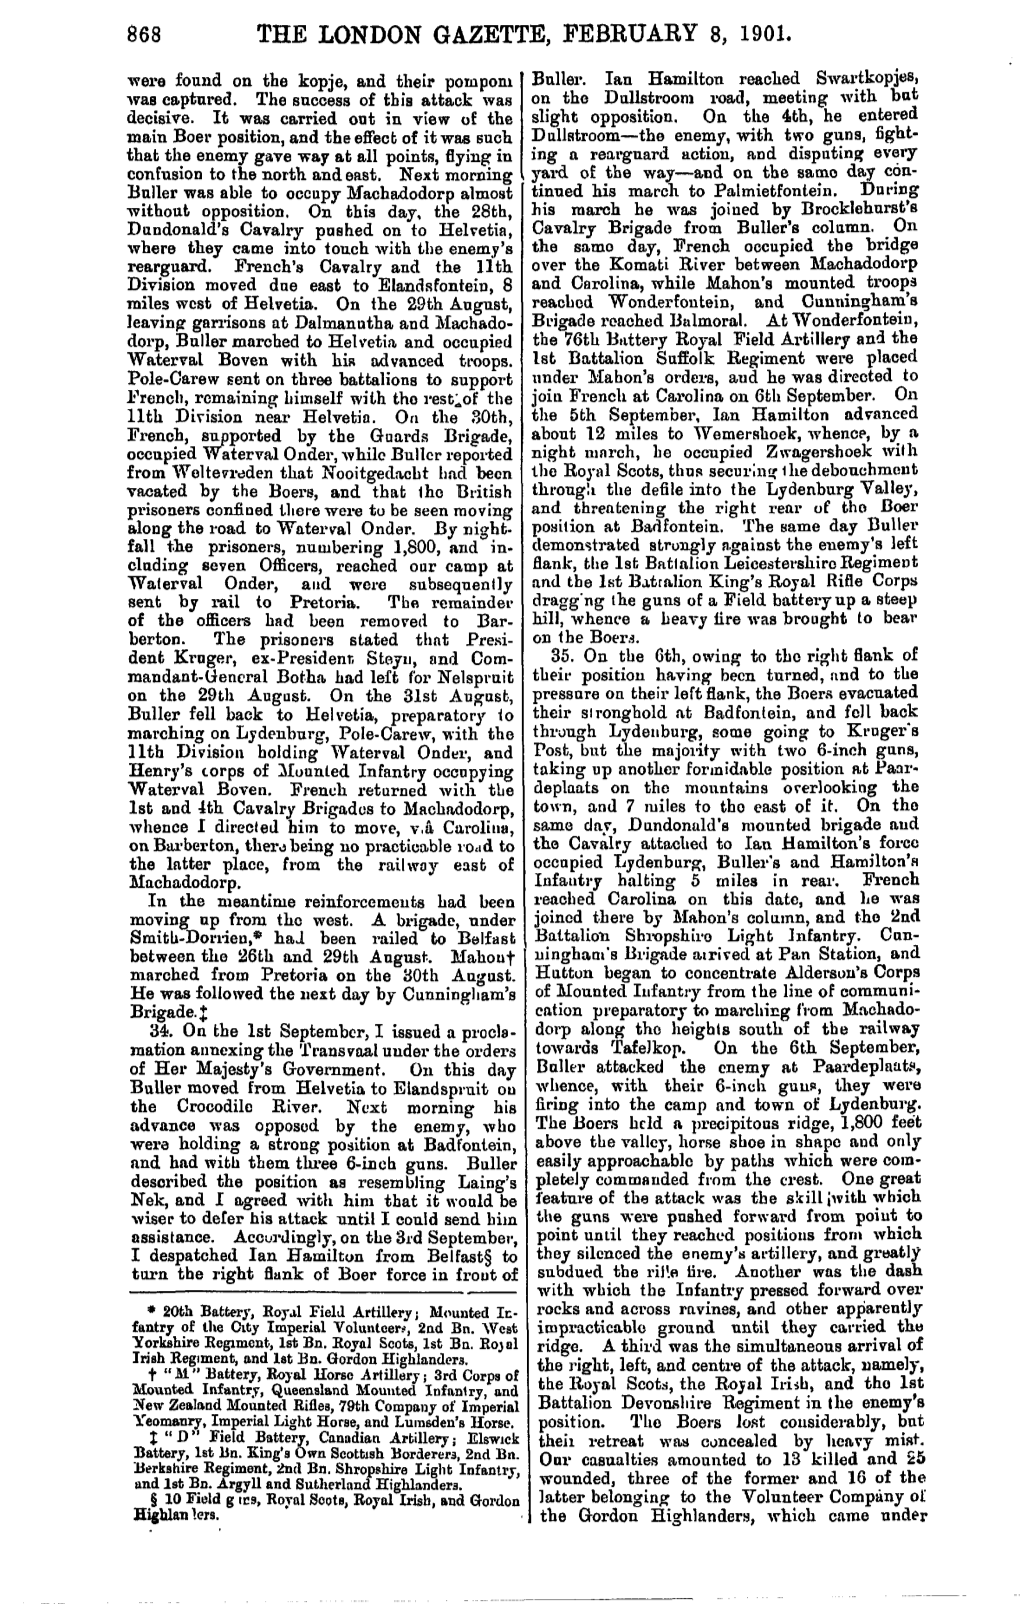 THE LONDON GAZETTE, FEBKUABY 8, 1901. Were Found on the Kopje, and Their Pompom Buller